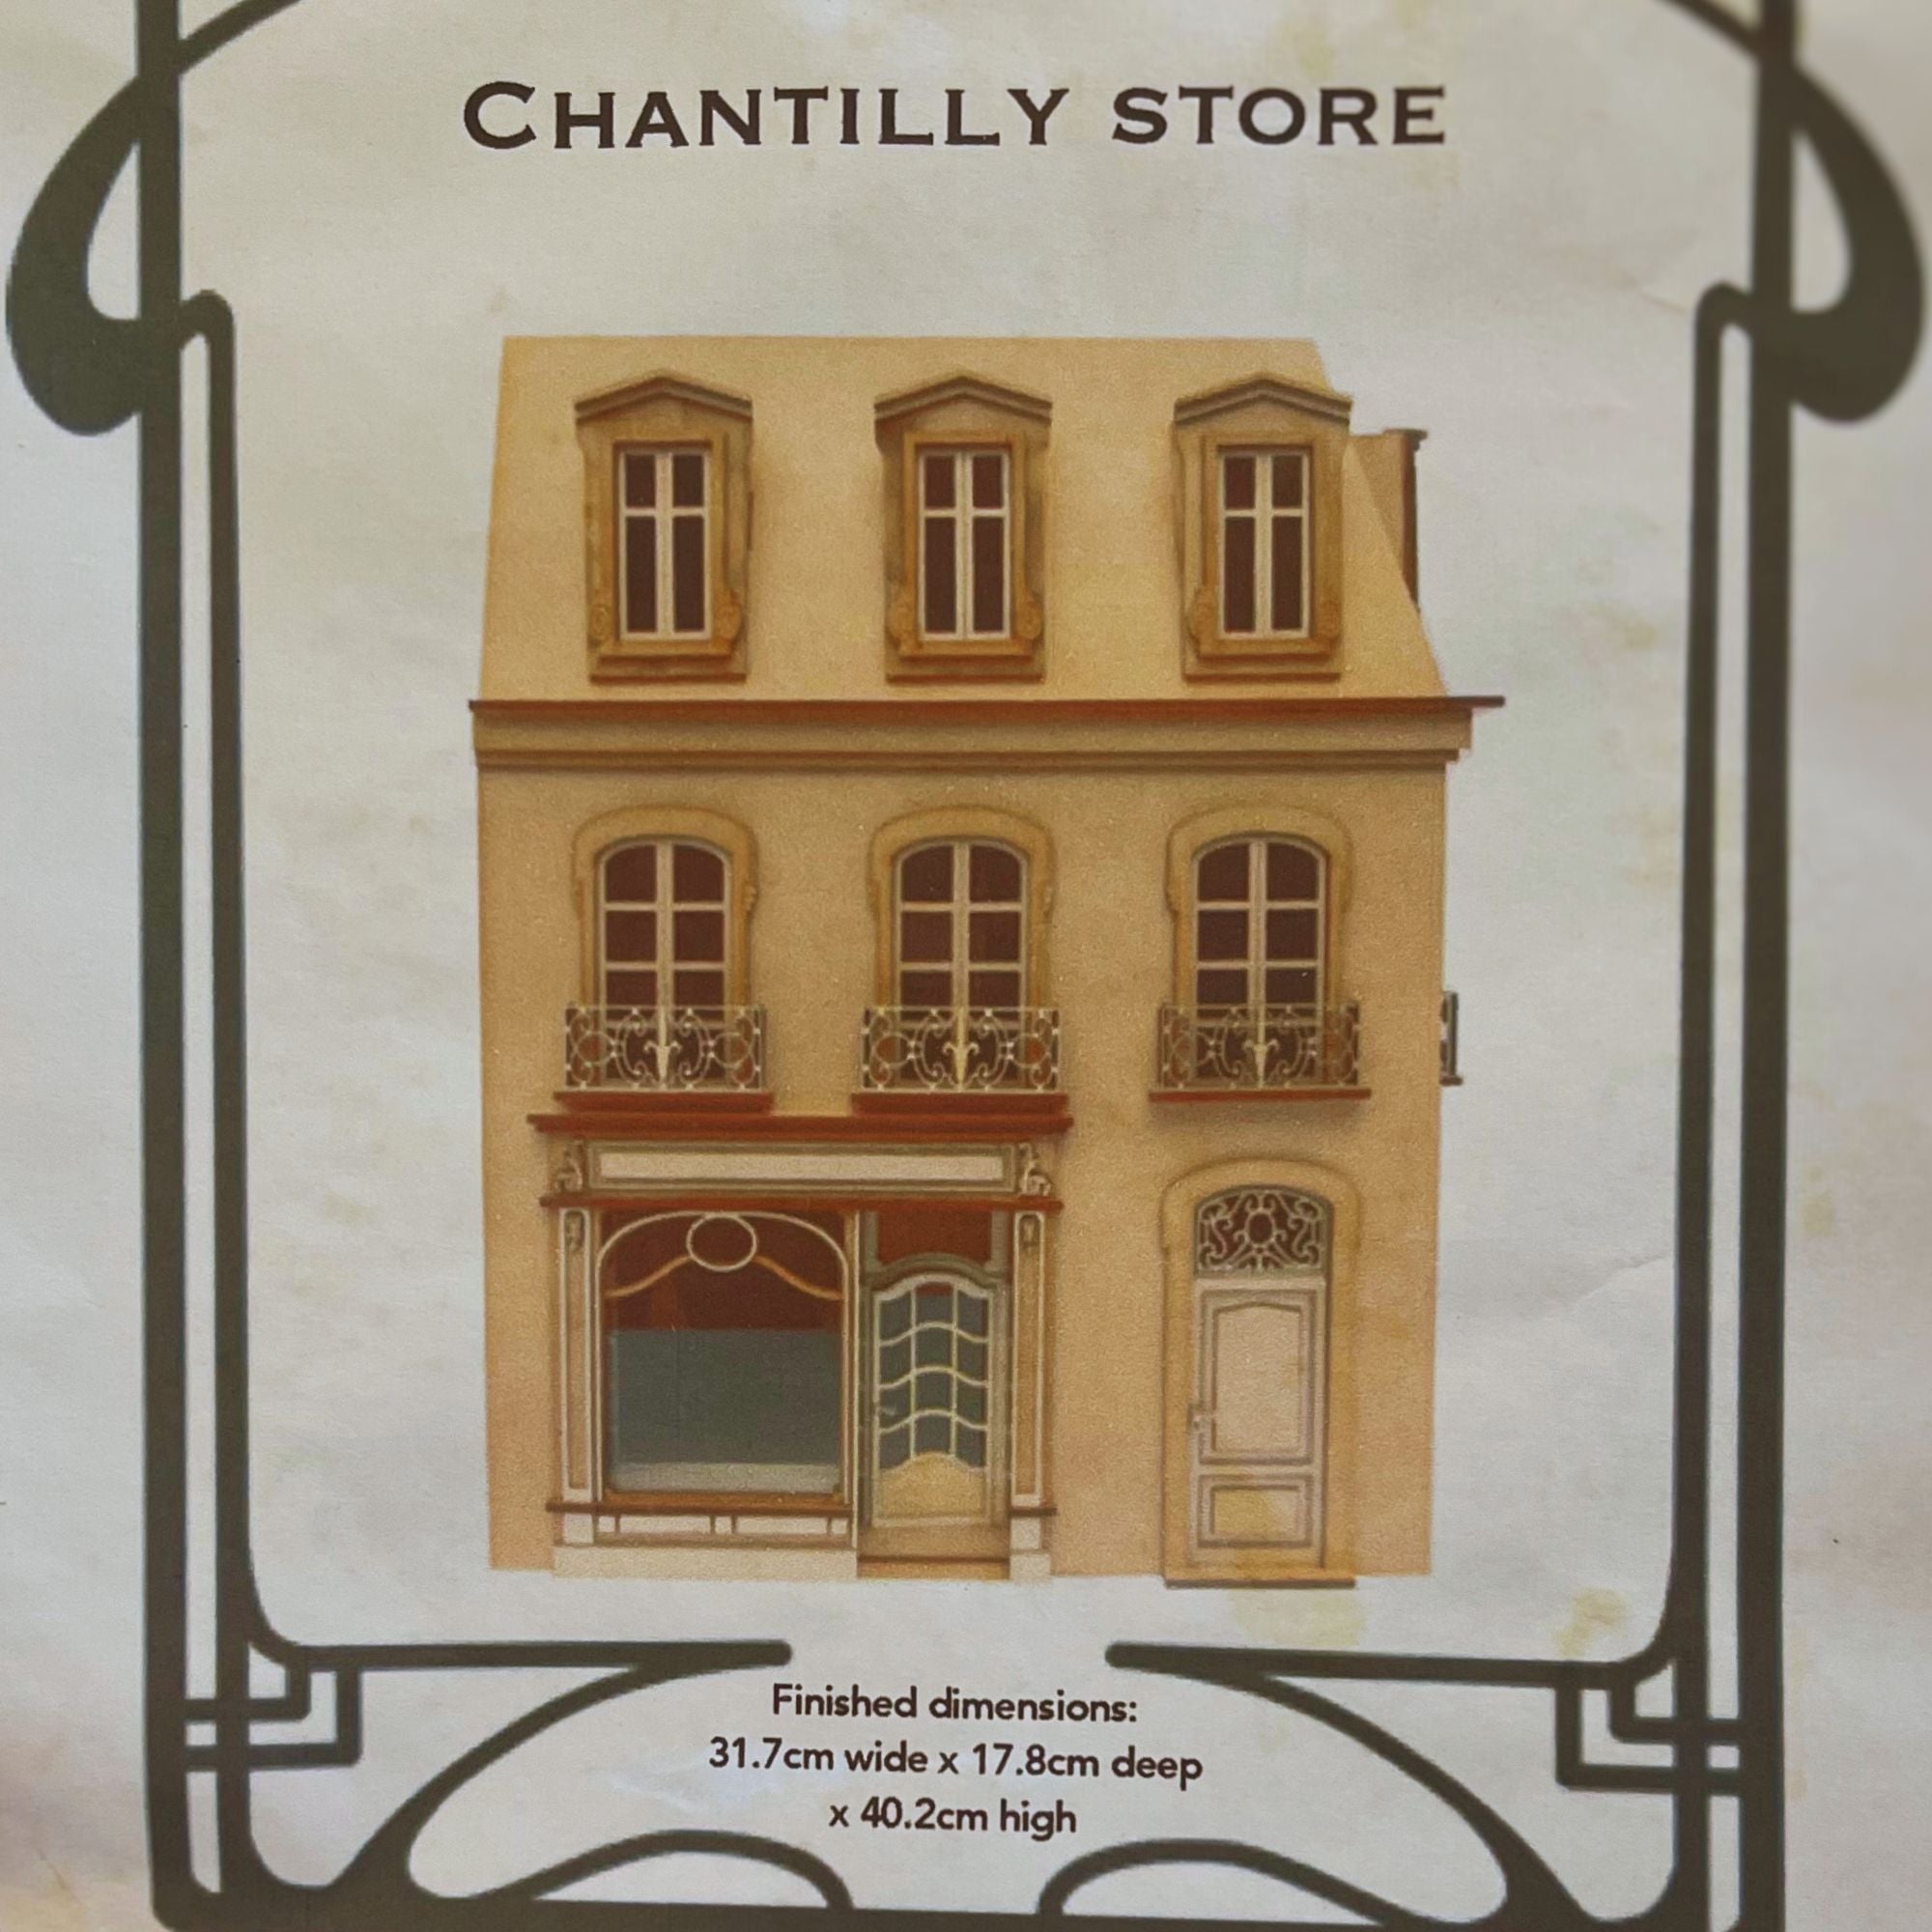 Chantilly Store 1:24 Scale Miniature Kit